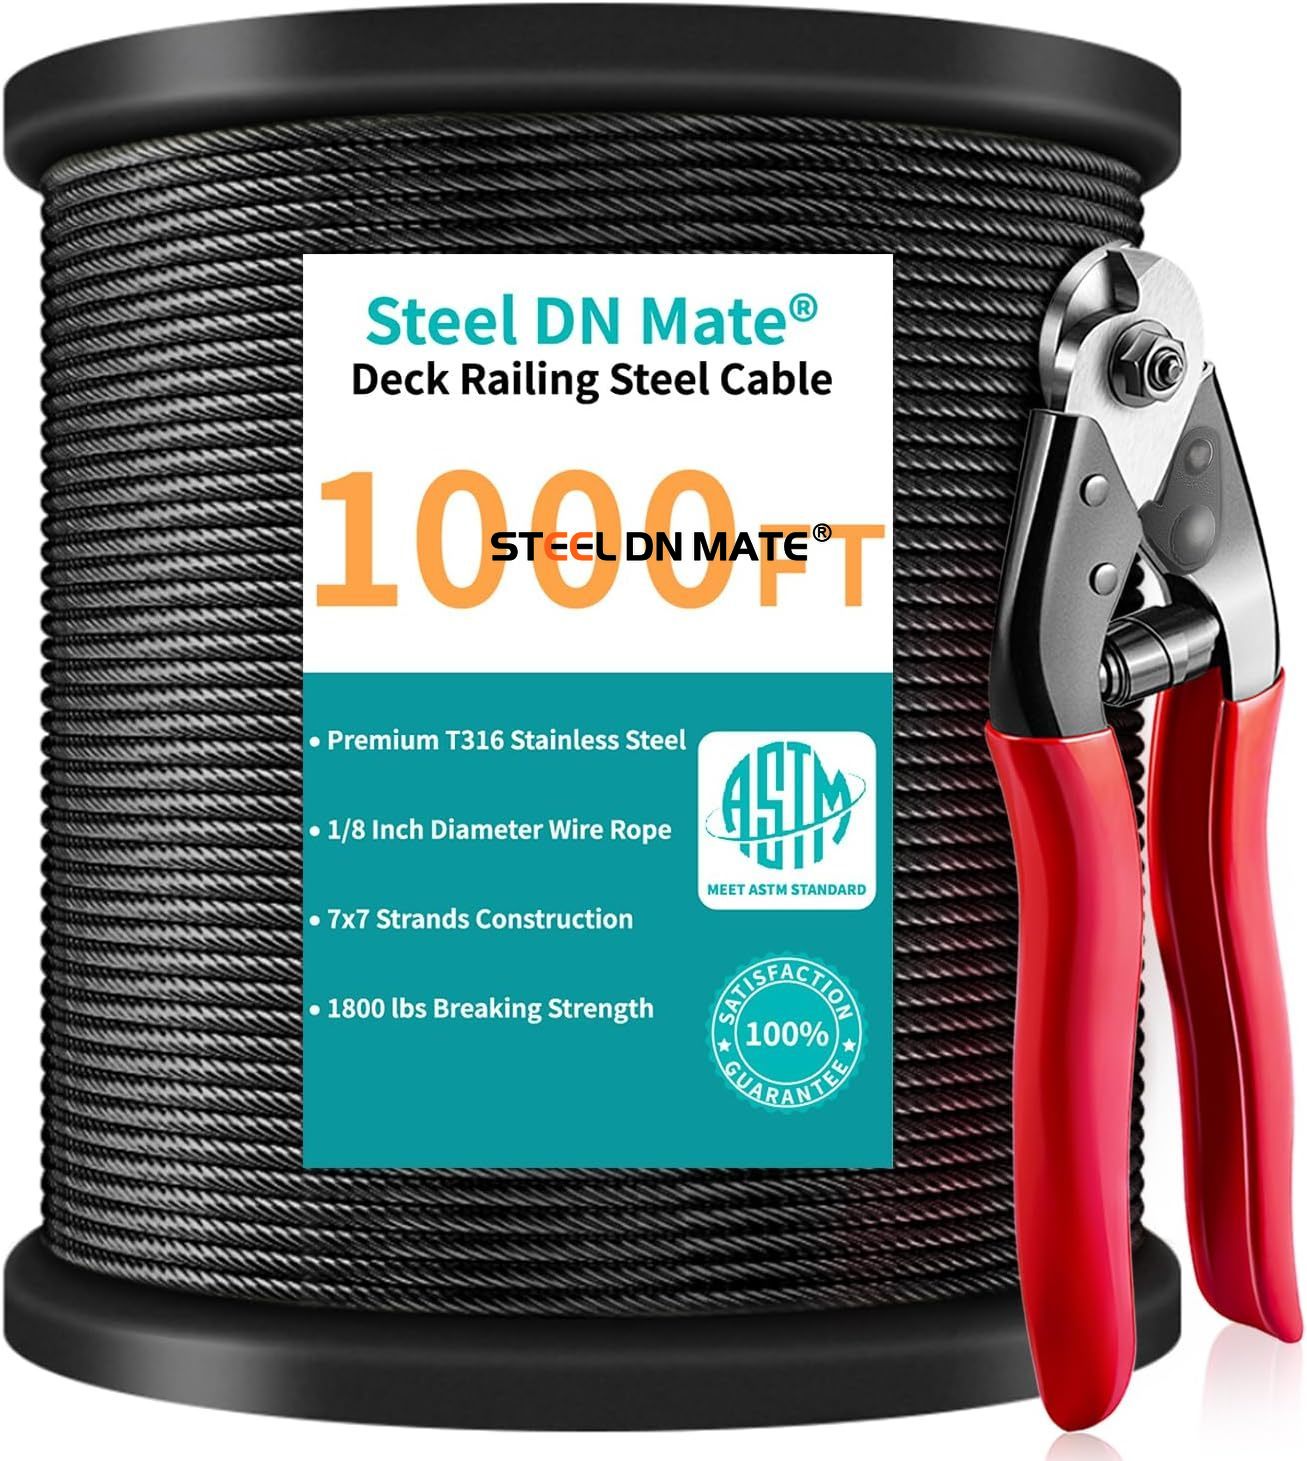 Steel DN Mate Black Wire Rope 1/8" T316 Marine Grade Stainless Steel Cable 7 × 7 Strands for Stair Fence Deck Cable Railing System, with Wire Cutter